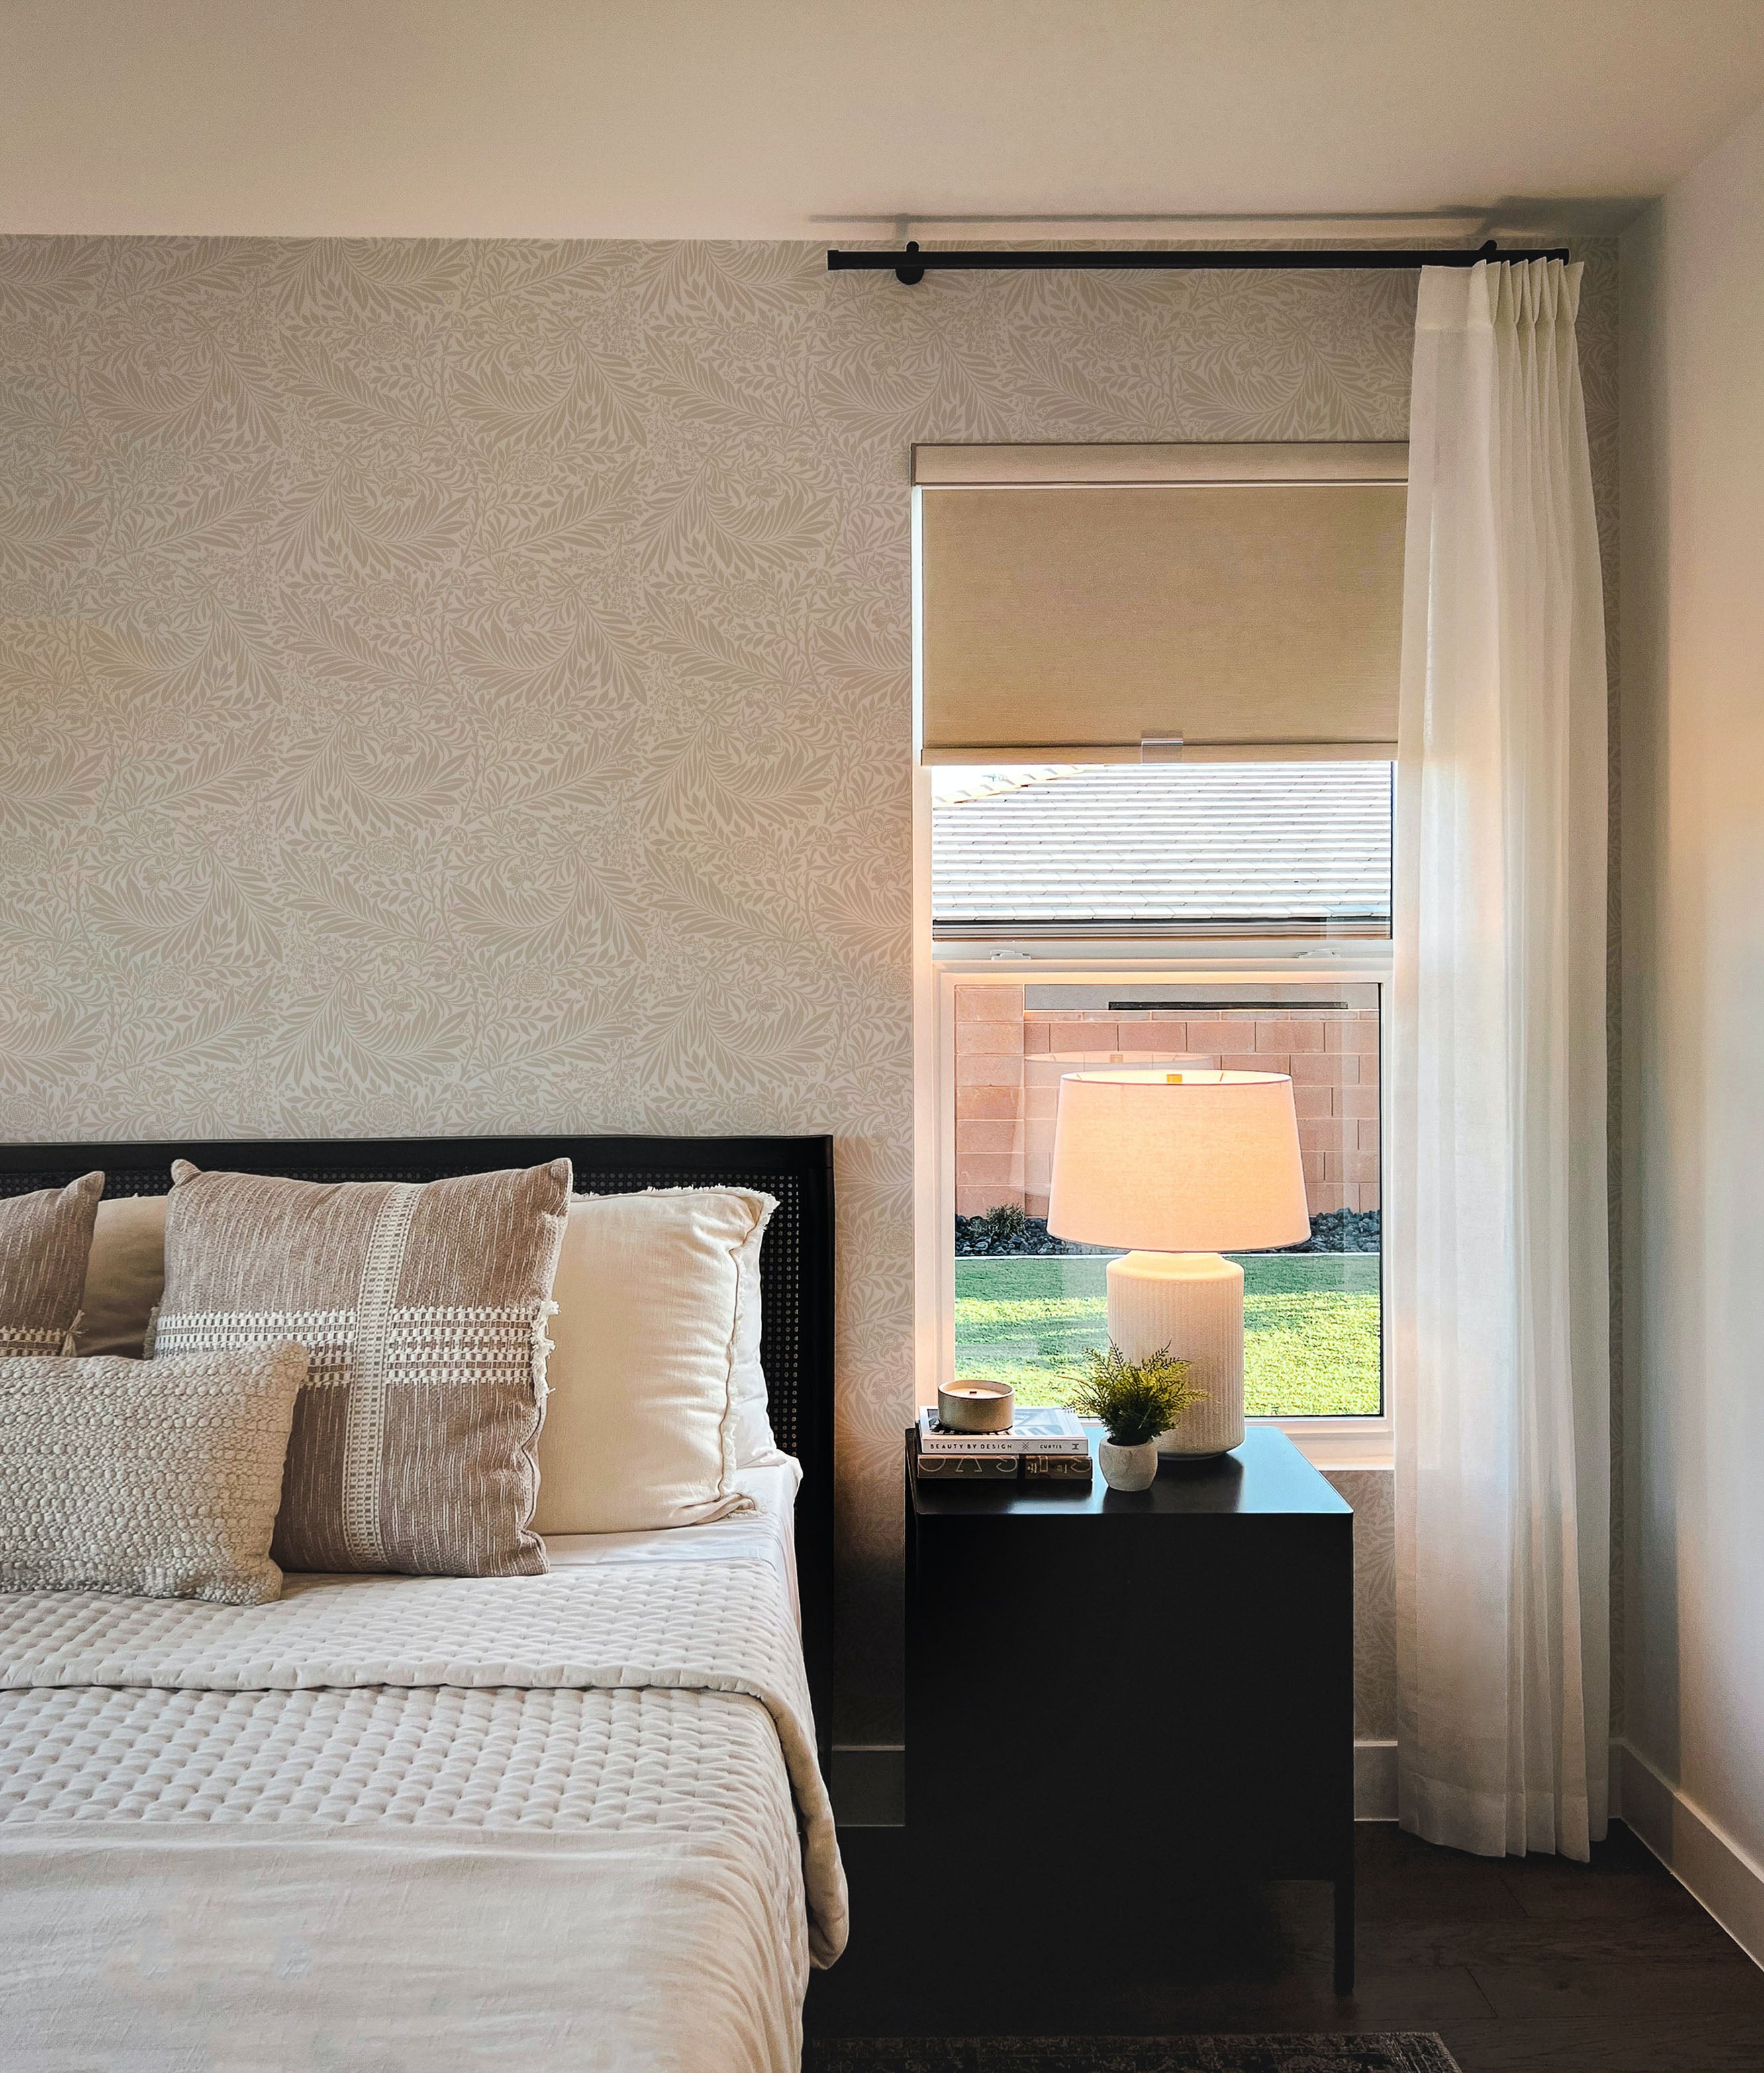 A tranquil bedroom space adorned with 'William Bough Wallpaper' in a botanical print, harmonizing with a neatly dressed bed, side table, and a window with a garden view.